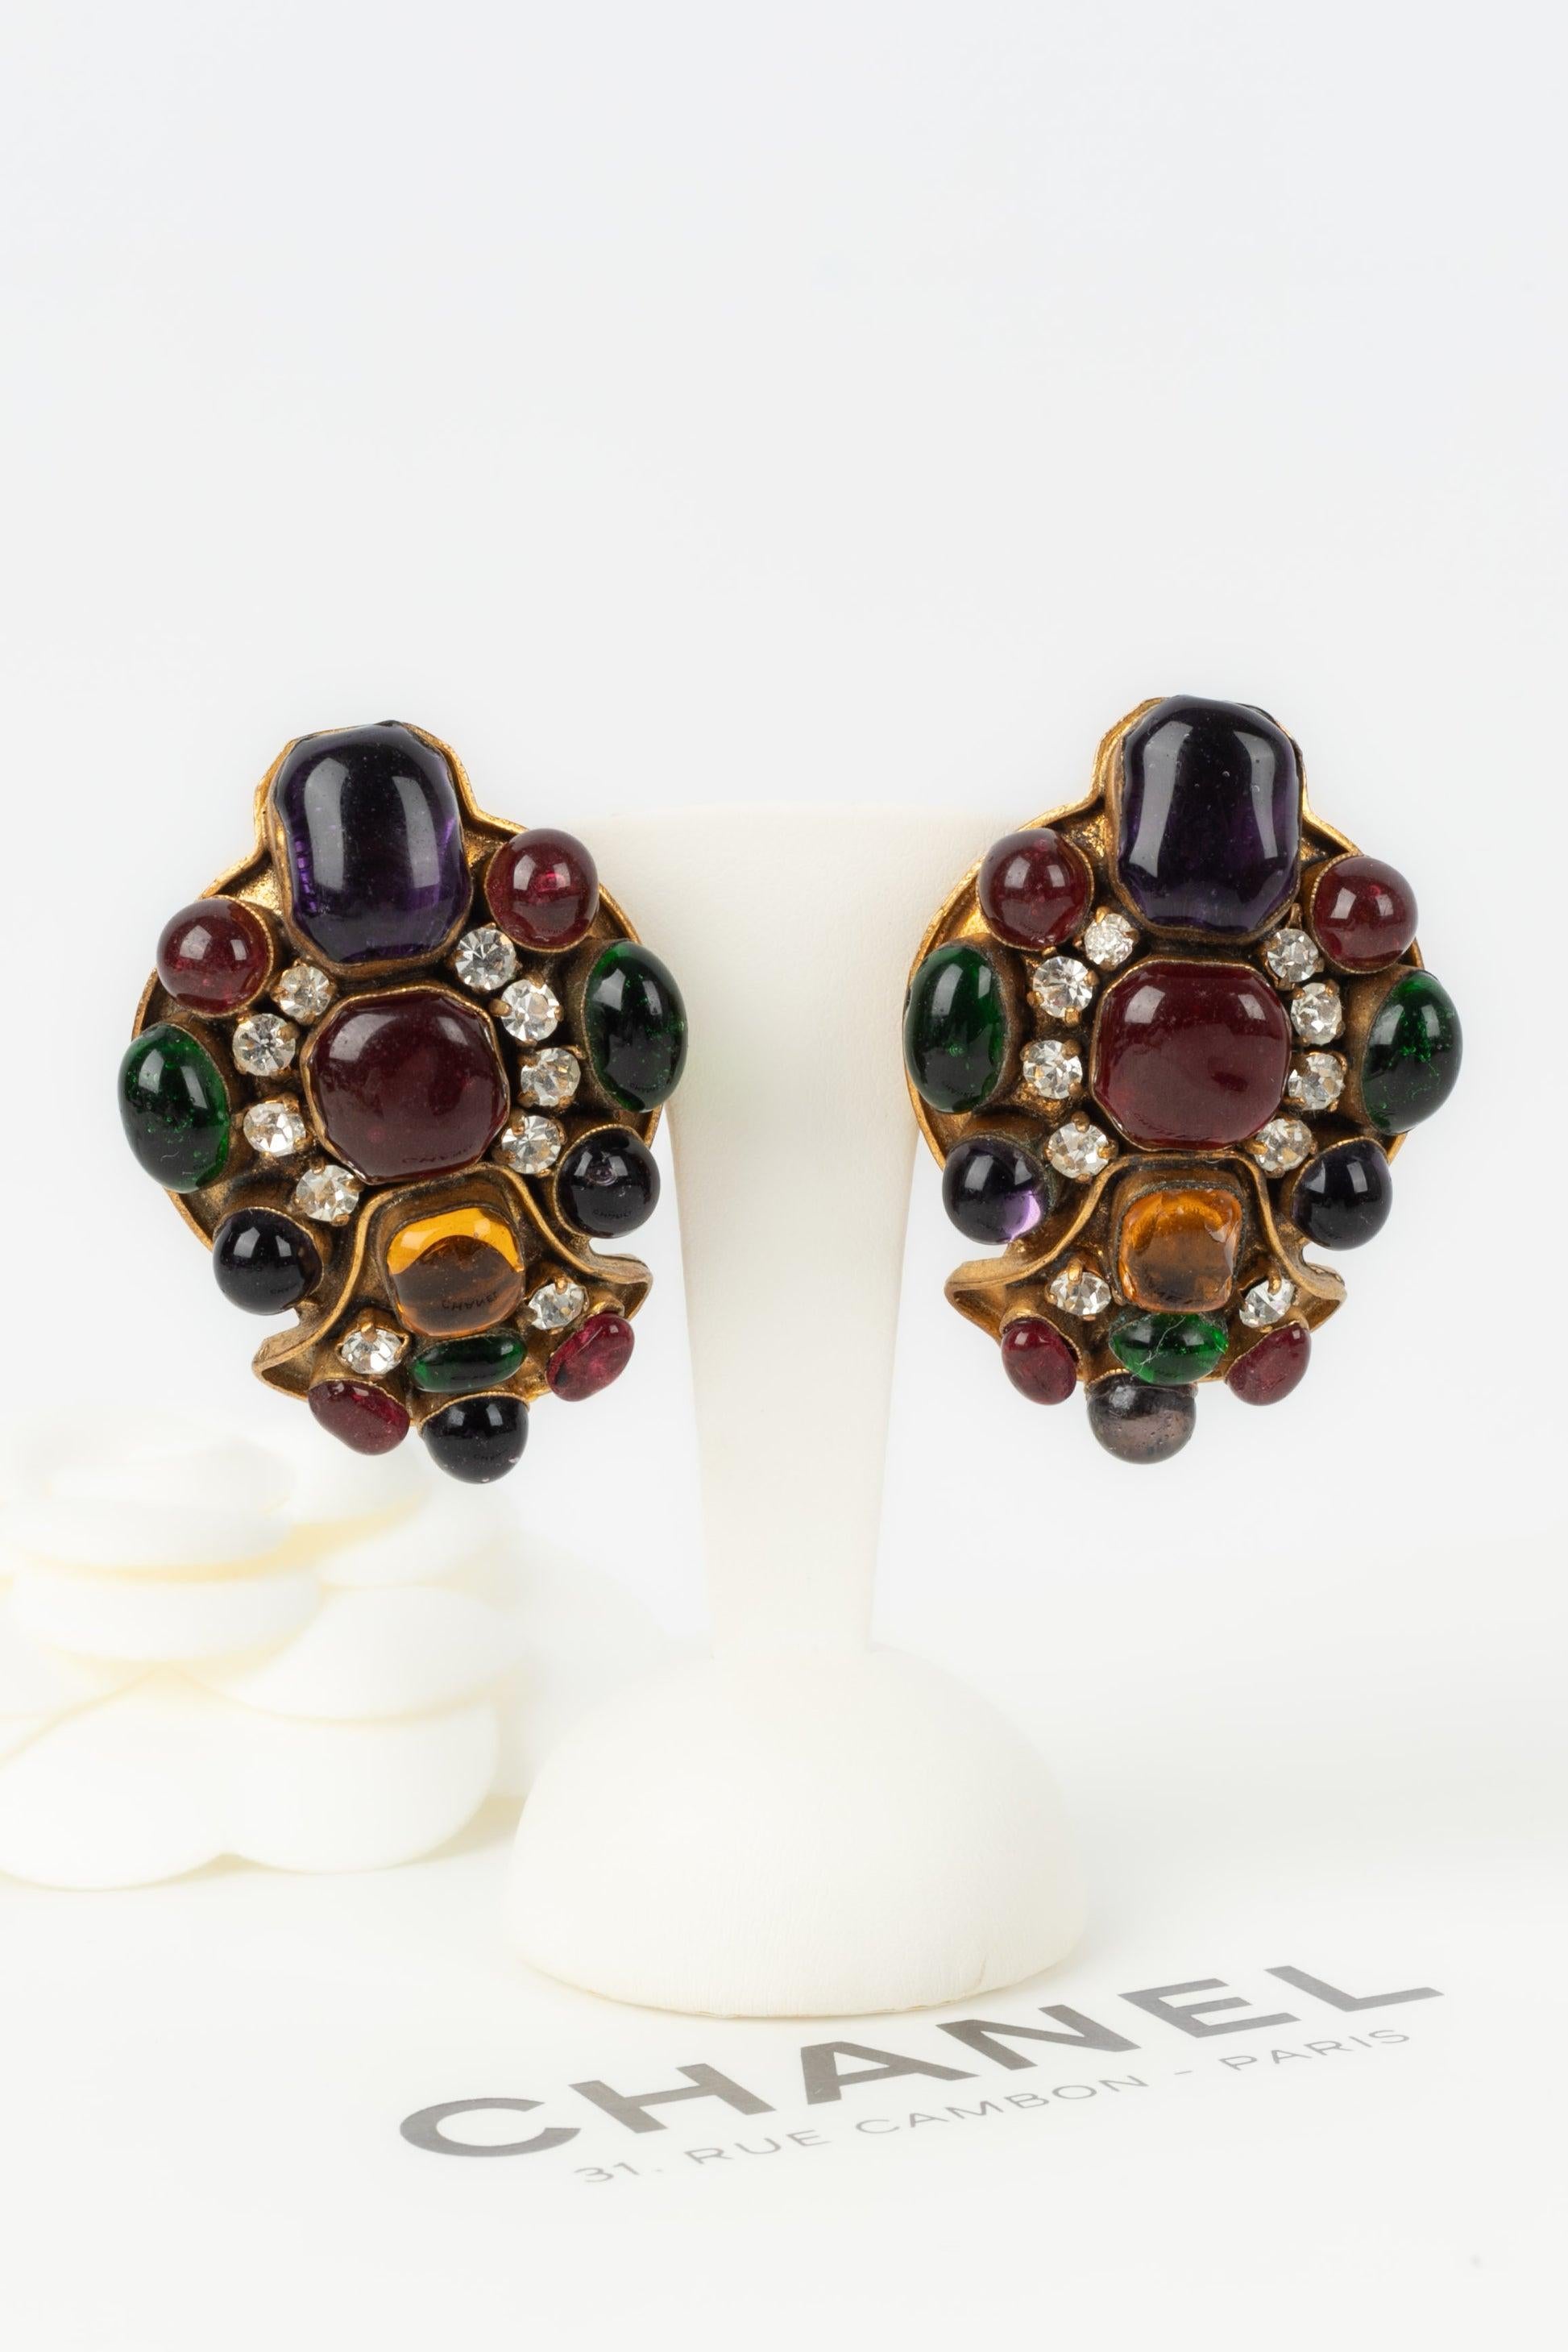 Chanel - (Made in France) Golden metal earrings with glass paste and rhinestones. Fall-Winter 1993 Collection. Gripoix Atelier for the House of Chanel.

Additional information:
Condition: Very good condition
Dimensions: Height: 4.5 cm

Seller